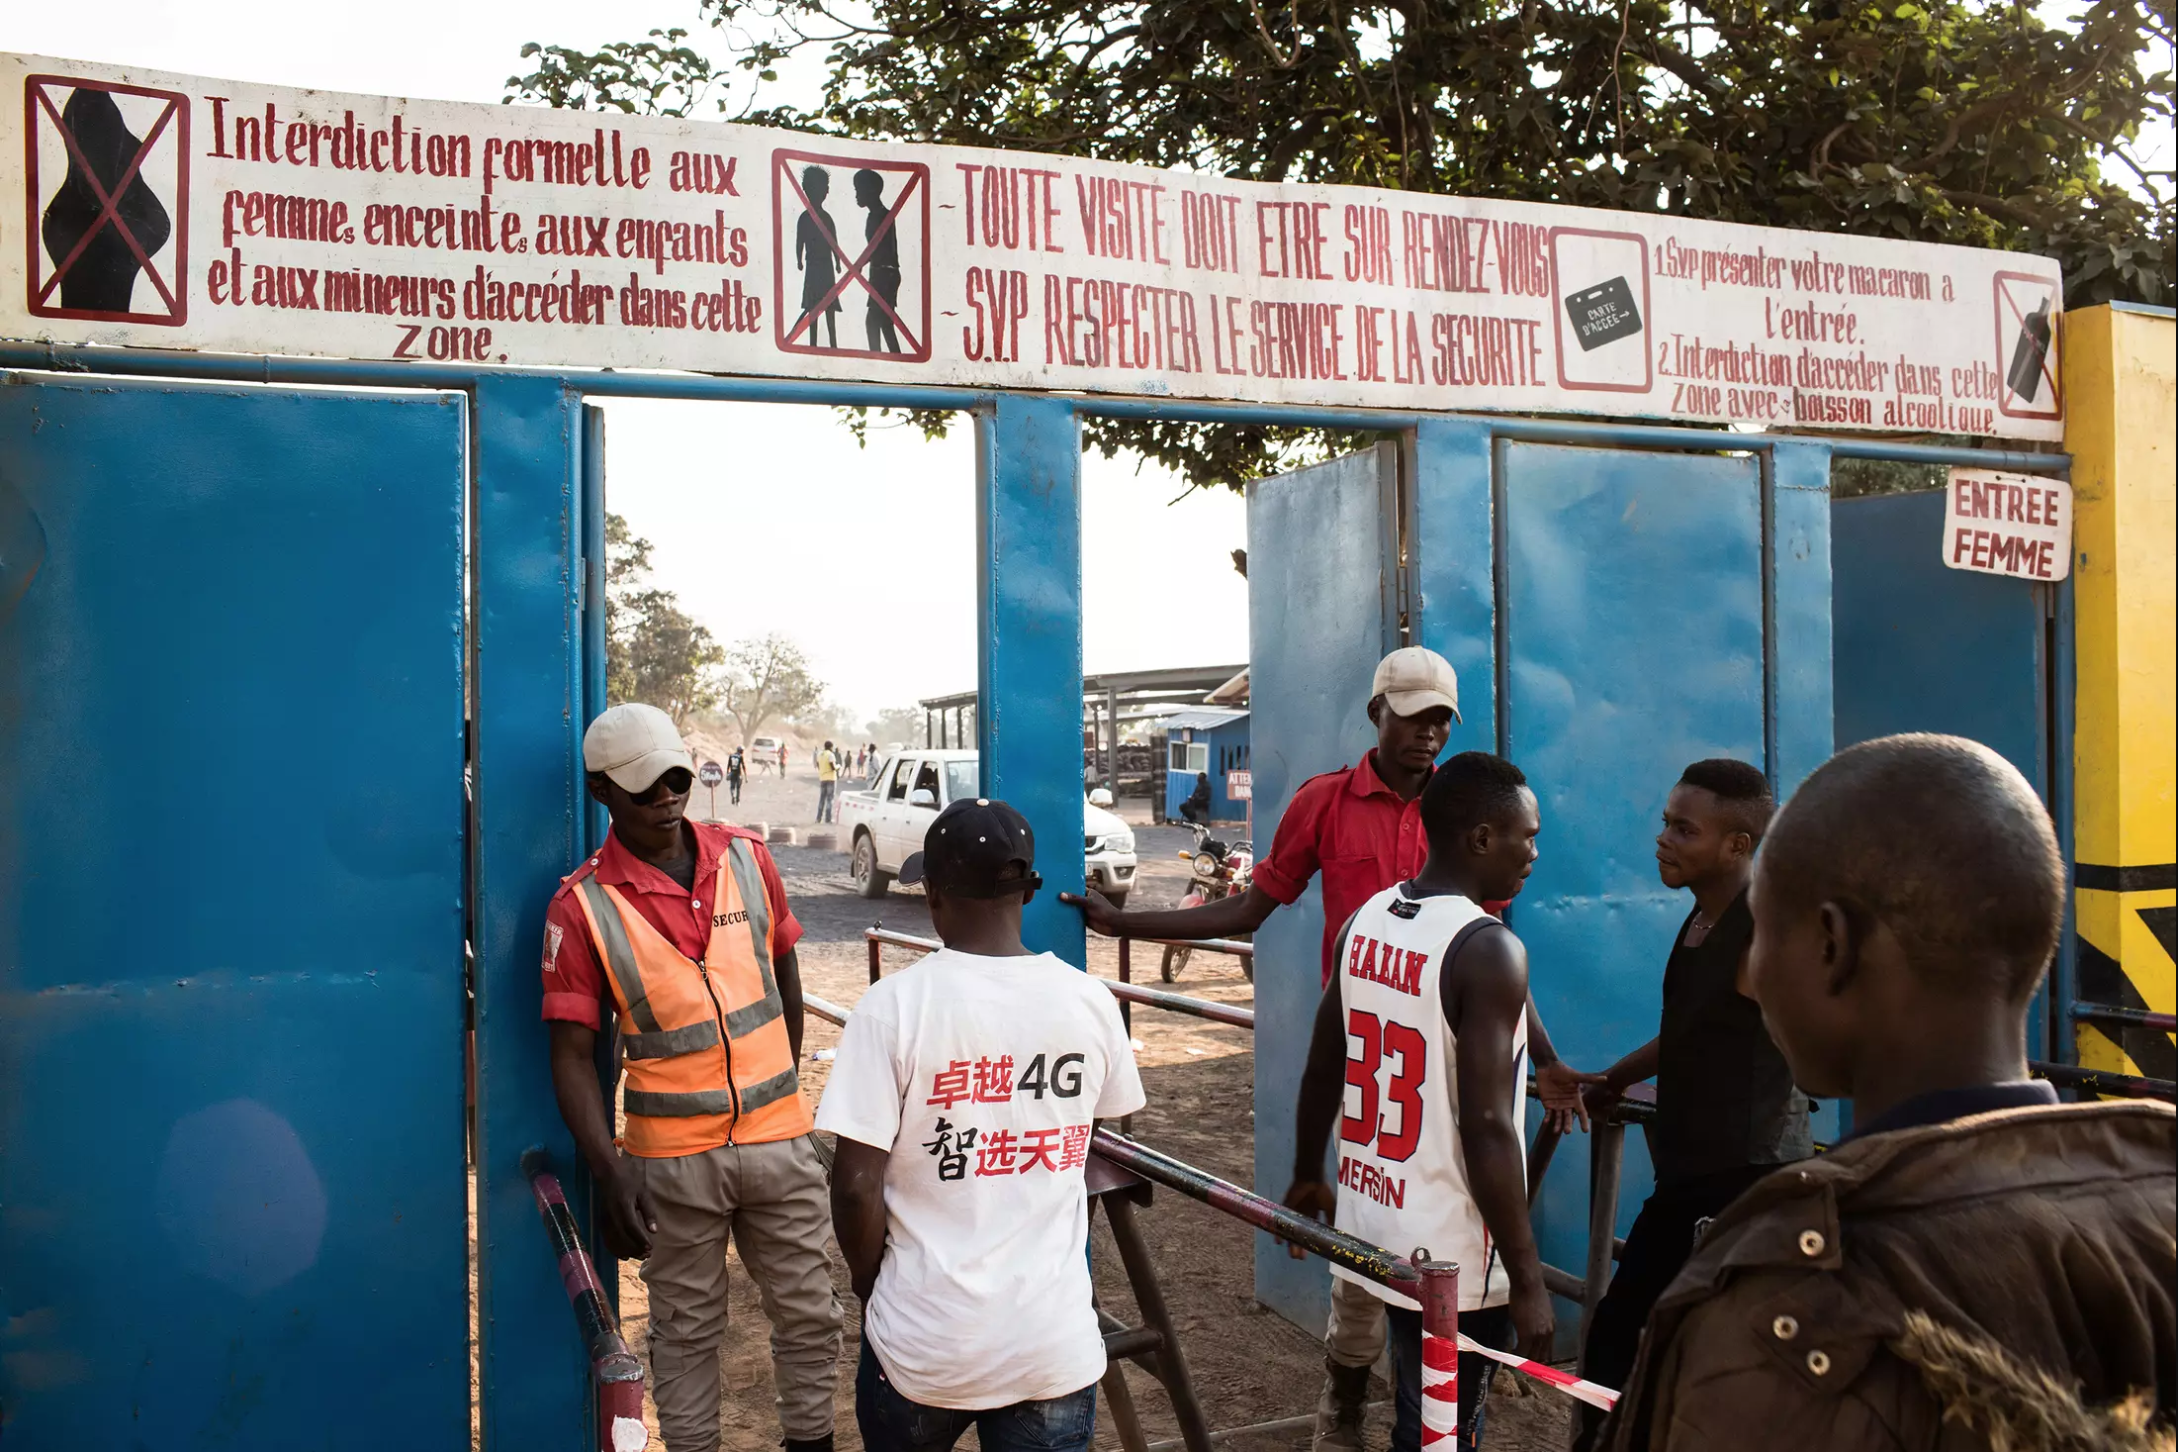 Signs in French at the entry gate to the Kasulo mine say pregnant women and children under 18 are not allowed inside. Image by Sebastian Meyer. Democratic Republic of Congo, 2018.